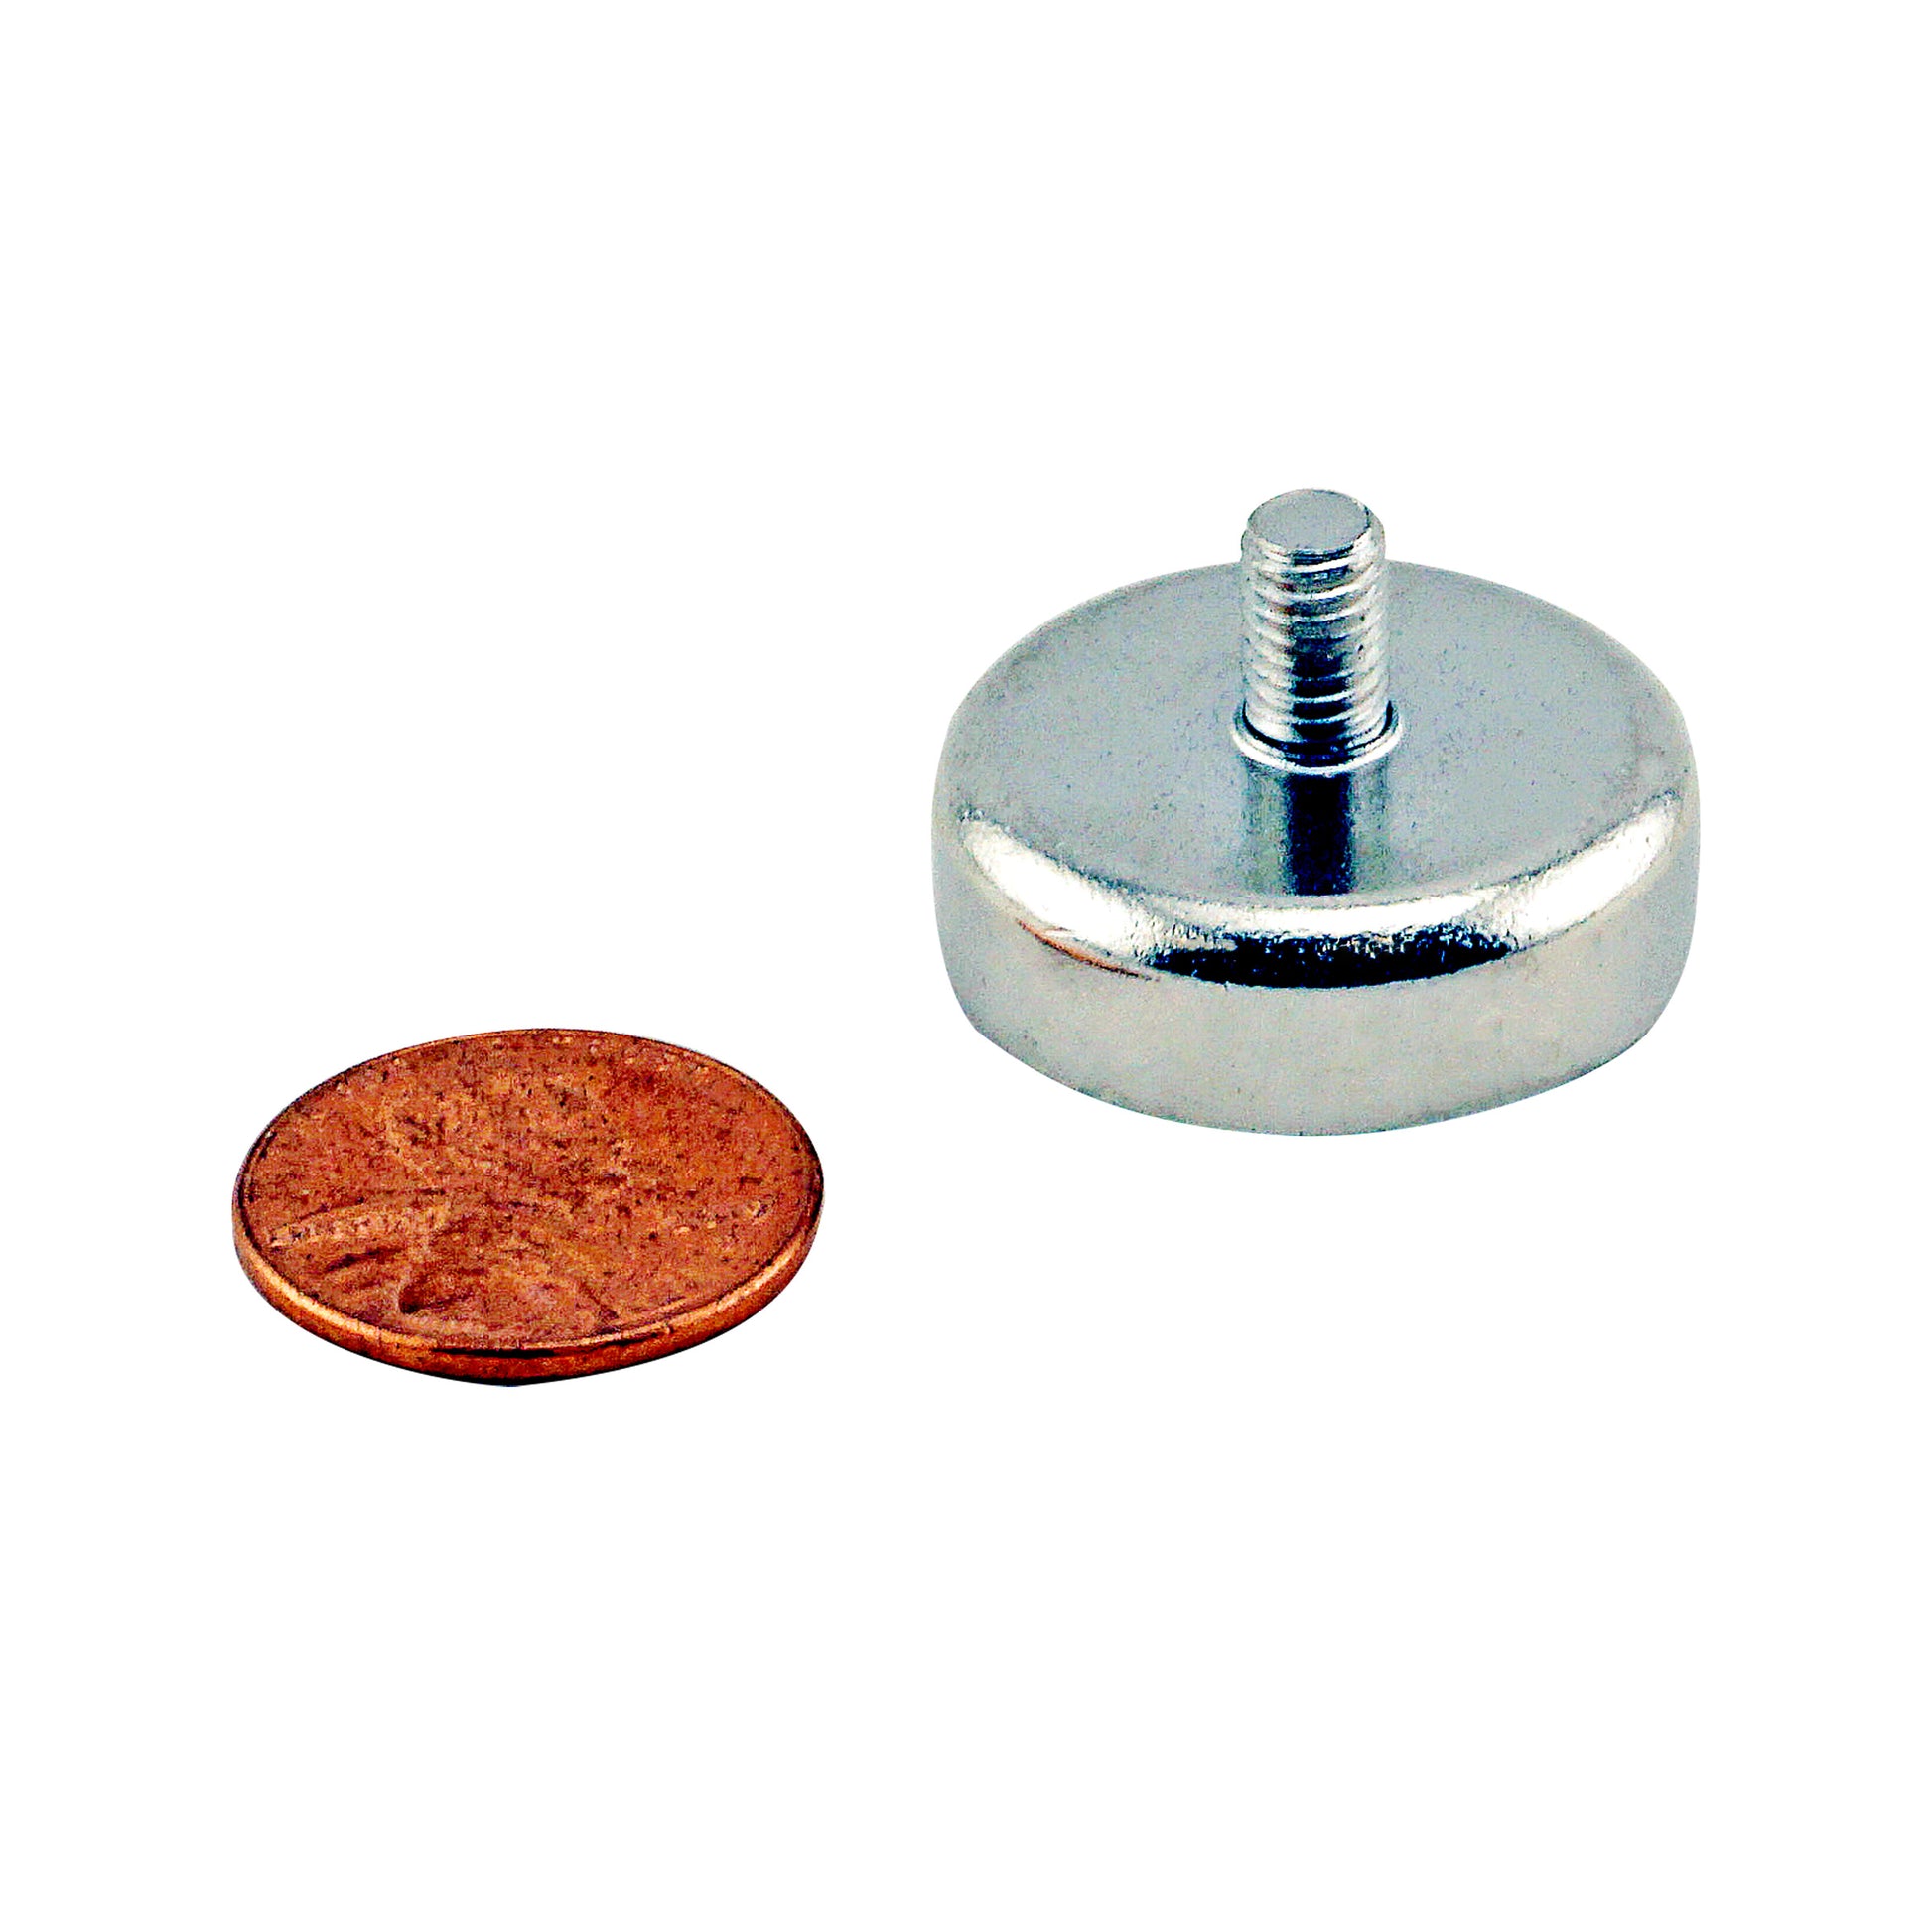 Load image into Gallery viewer, CACM098S01 Ceramic Round Base Magnet with Male Thread - Compared to Penny for Size Reference